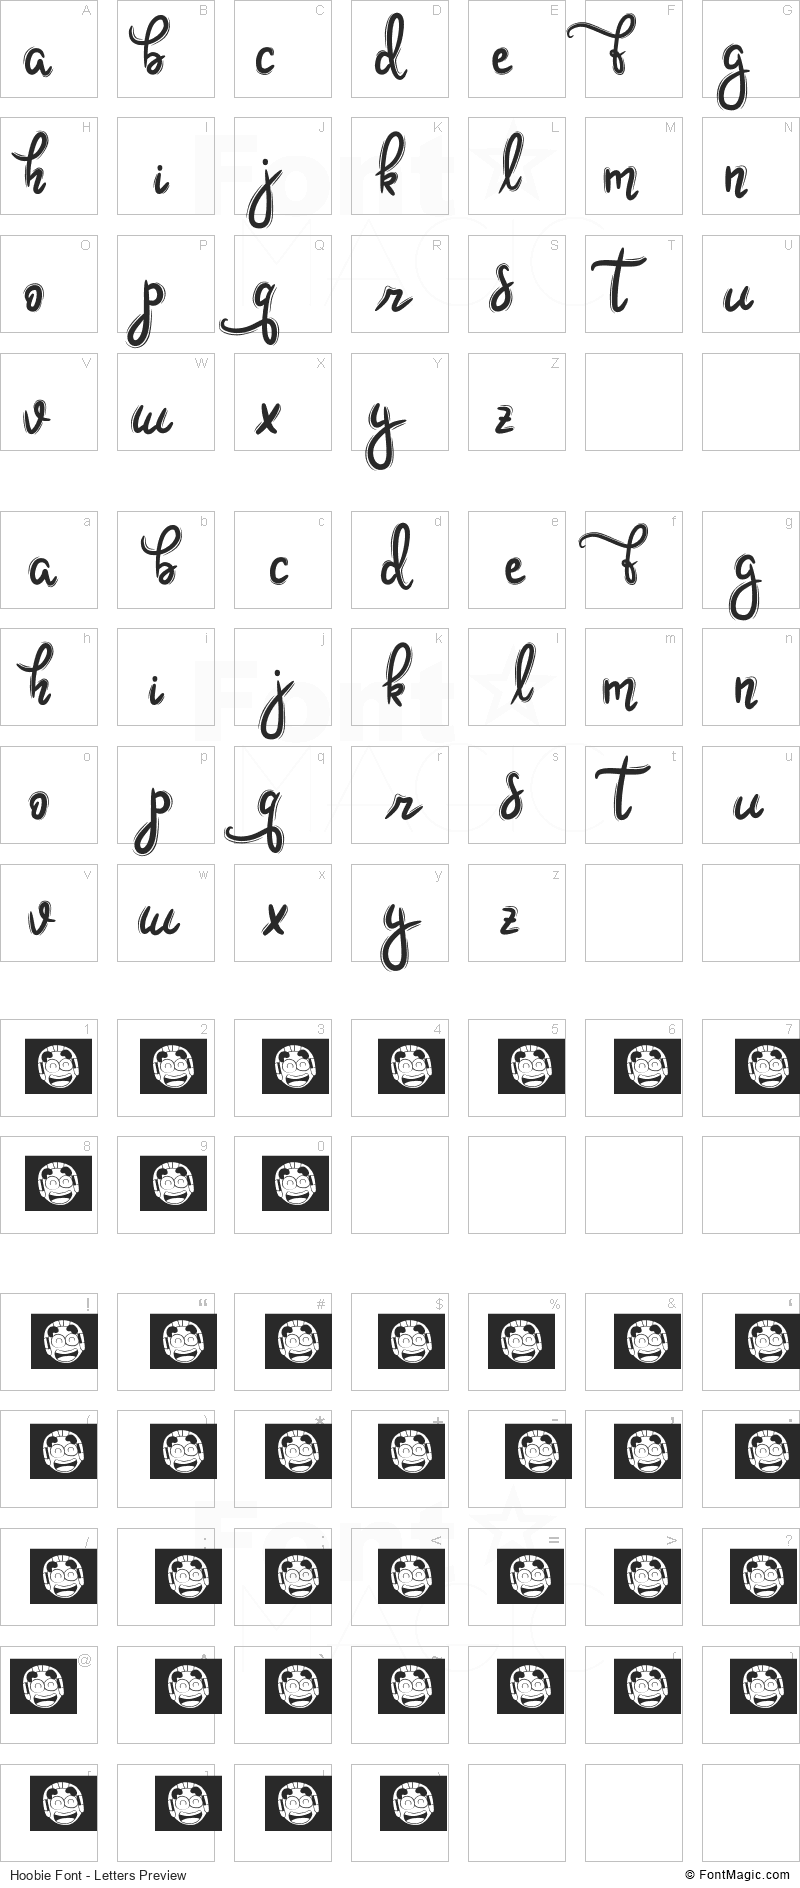 Hoobie Font - All Latters Preview Chart